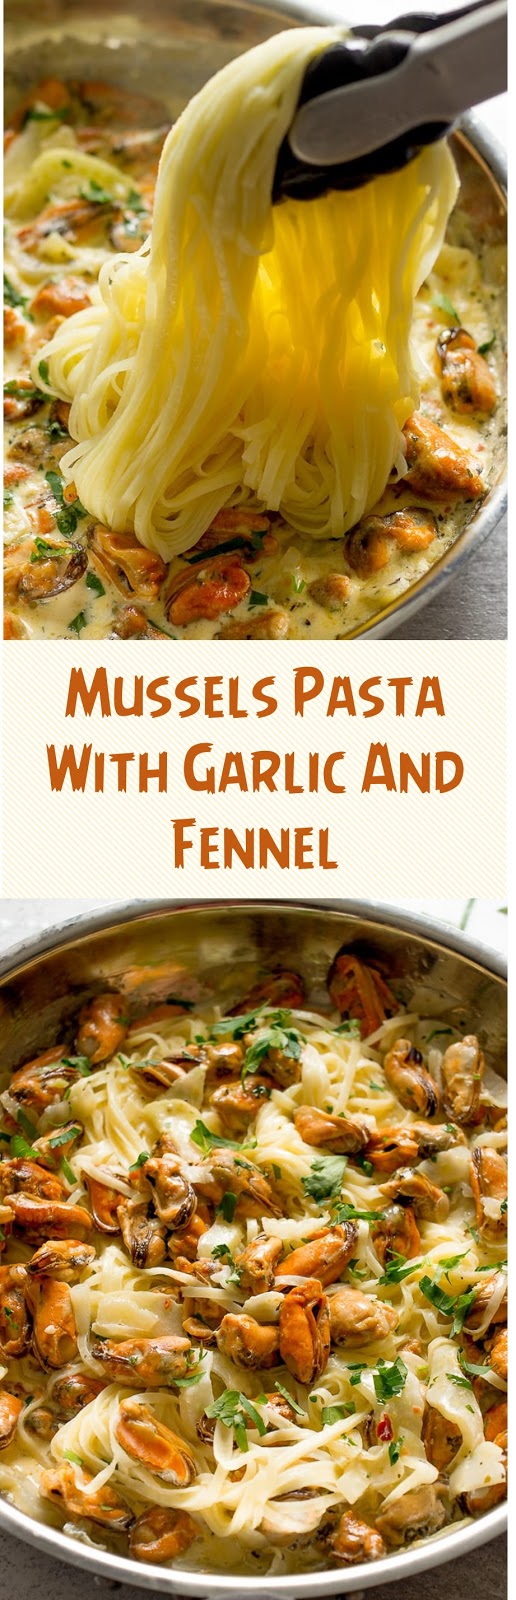 Mussels Pasta With Garlic And Fennel